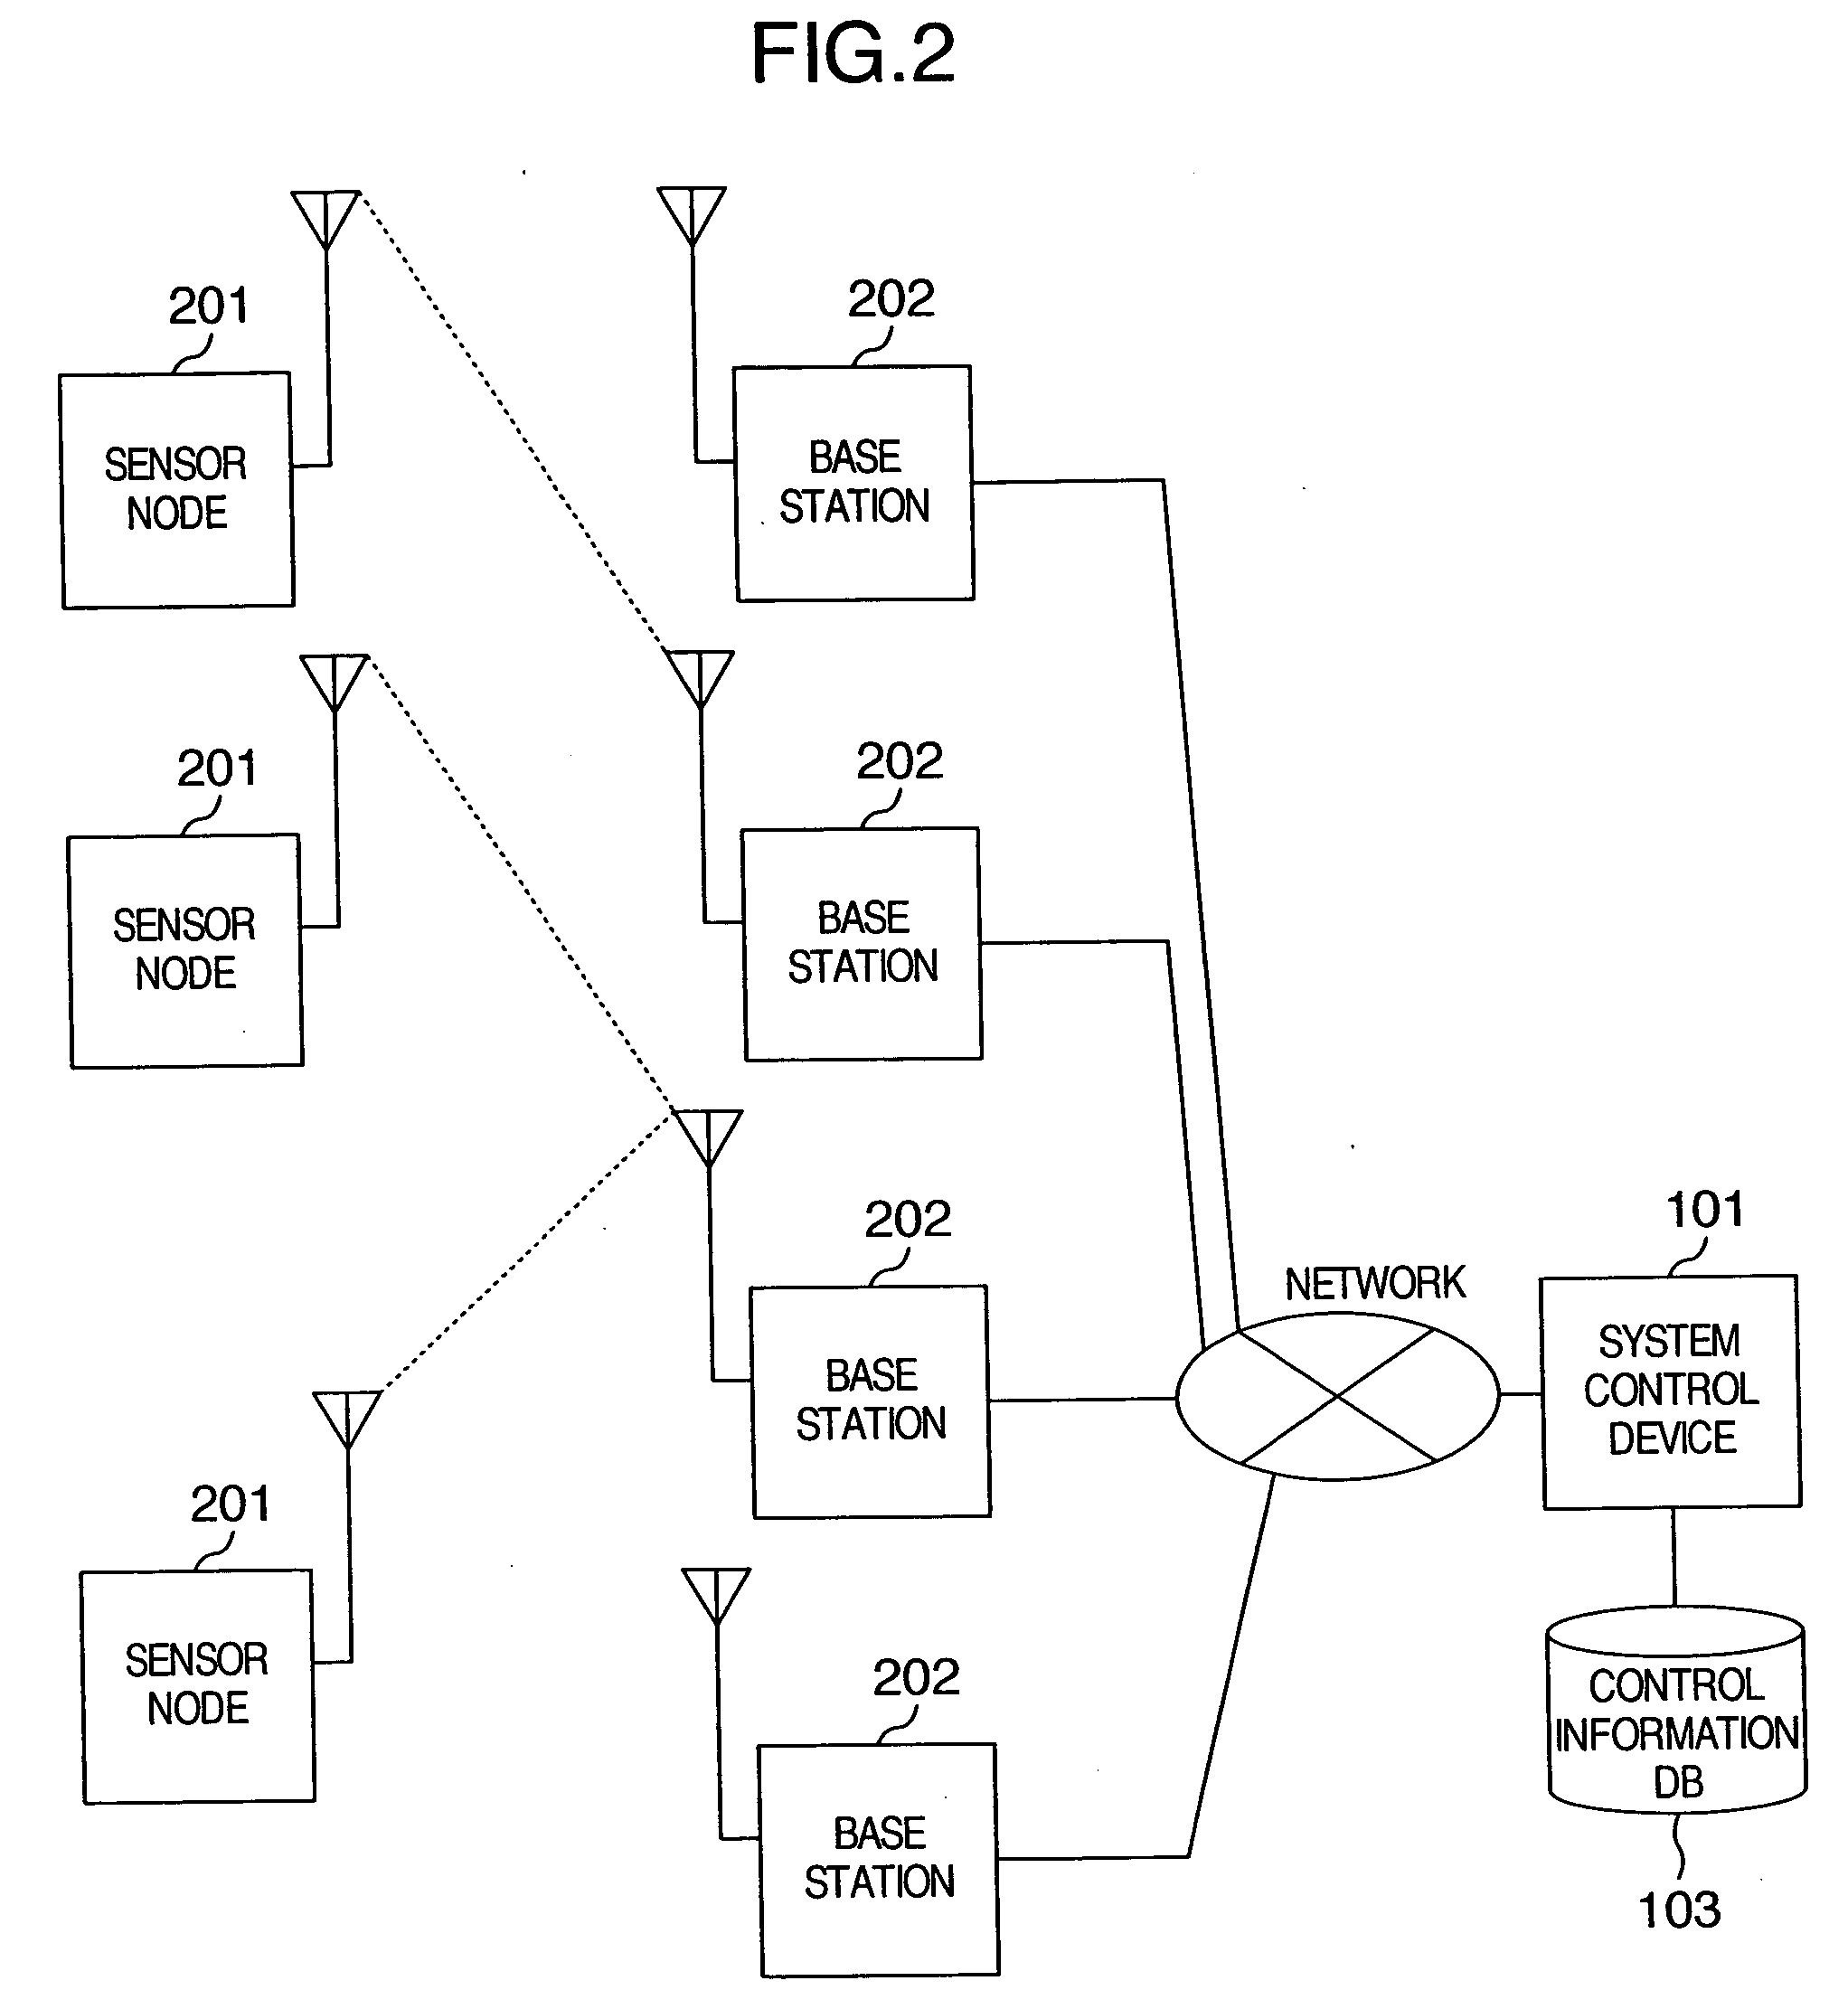 Method for inspecting and monitoring building, structure, or facilities accompanying them